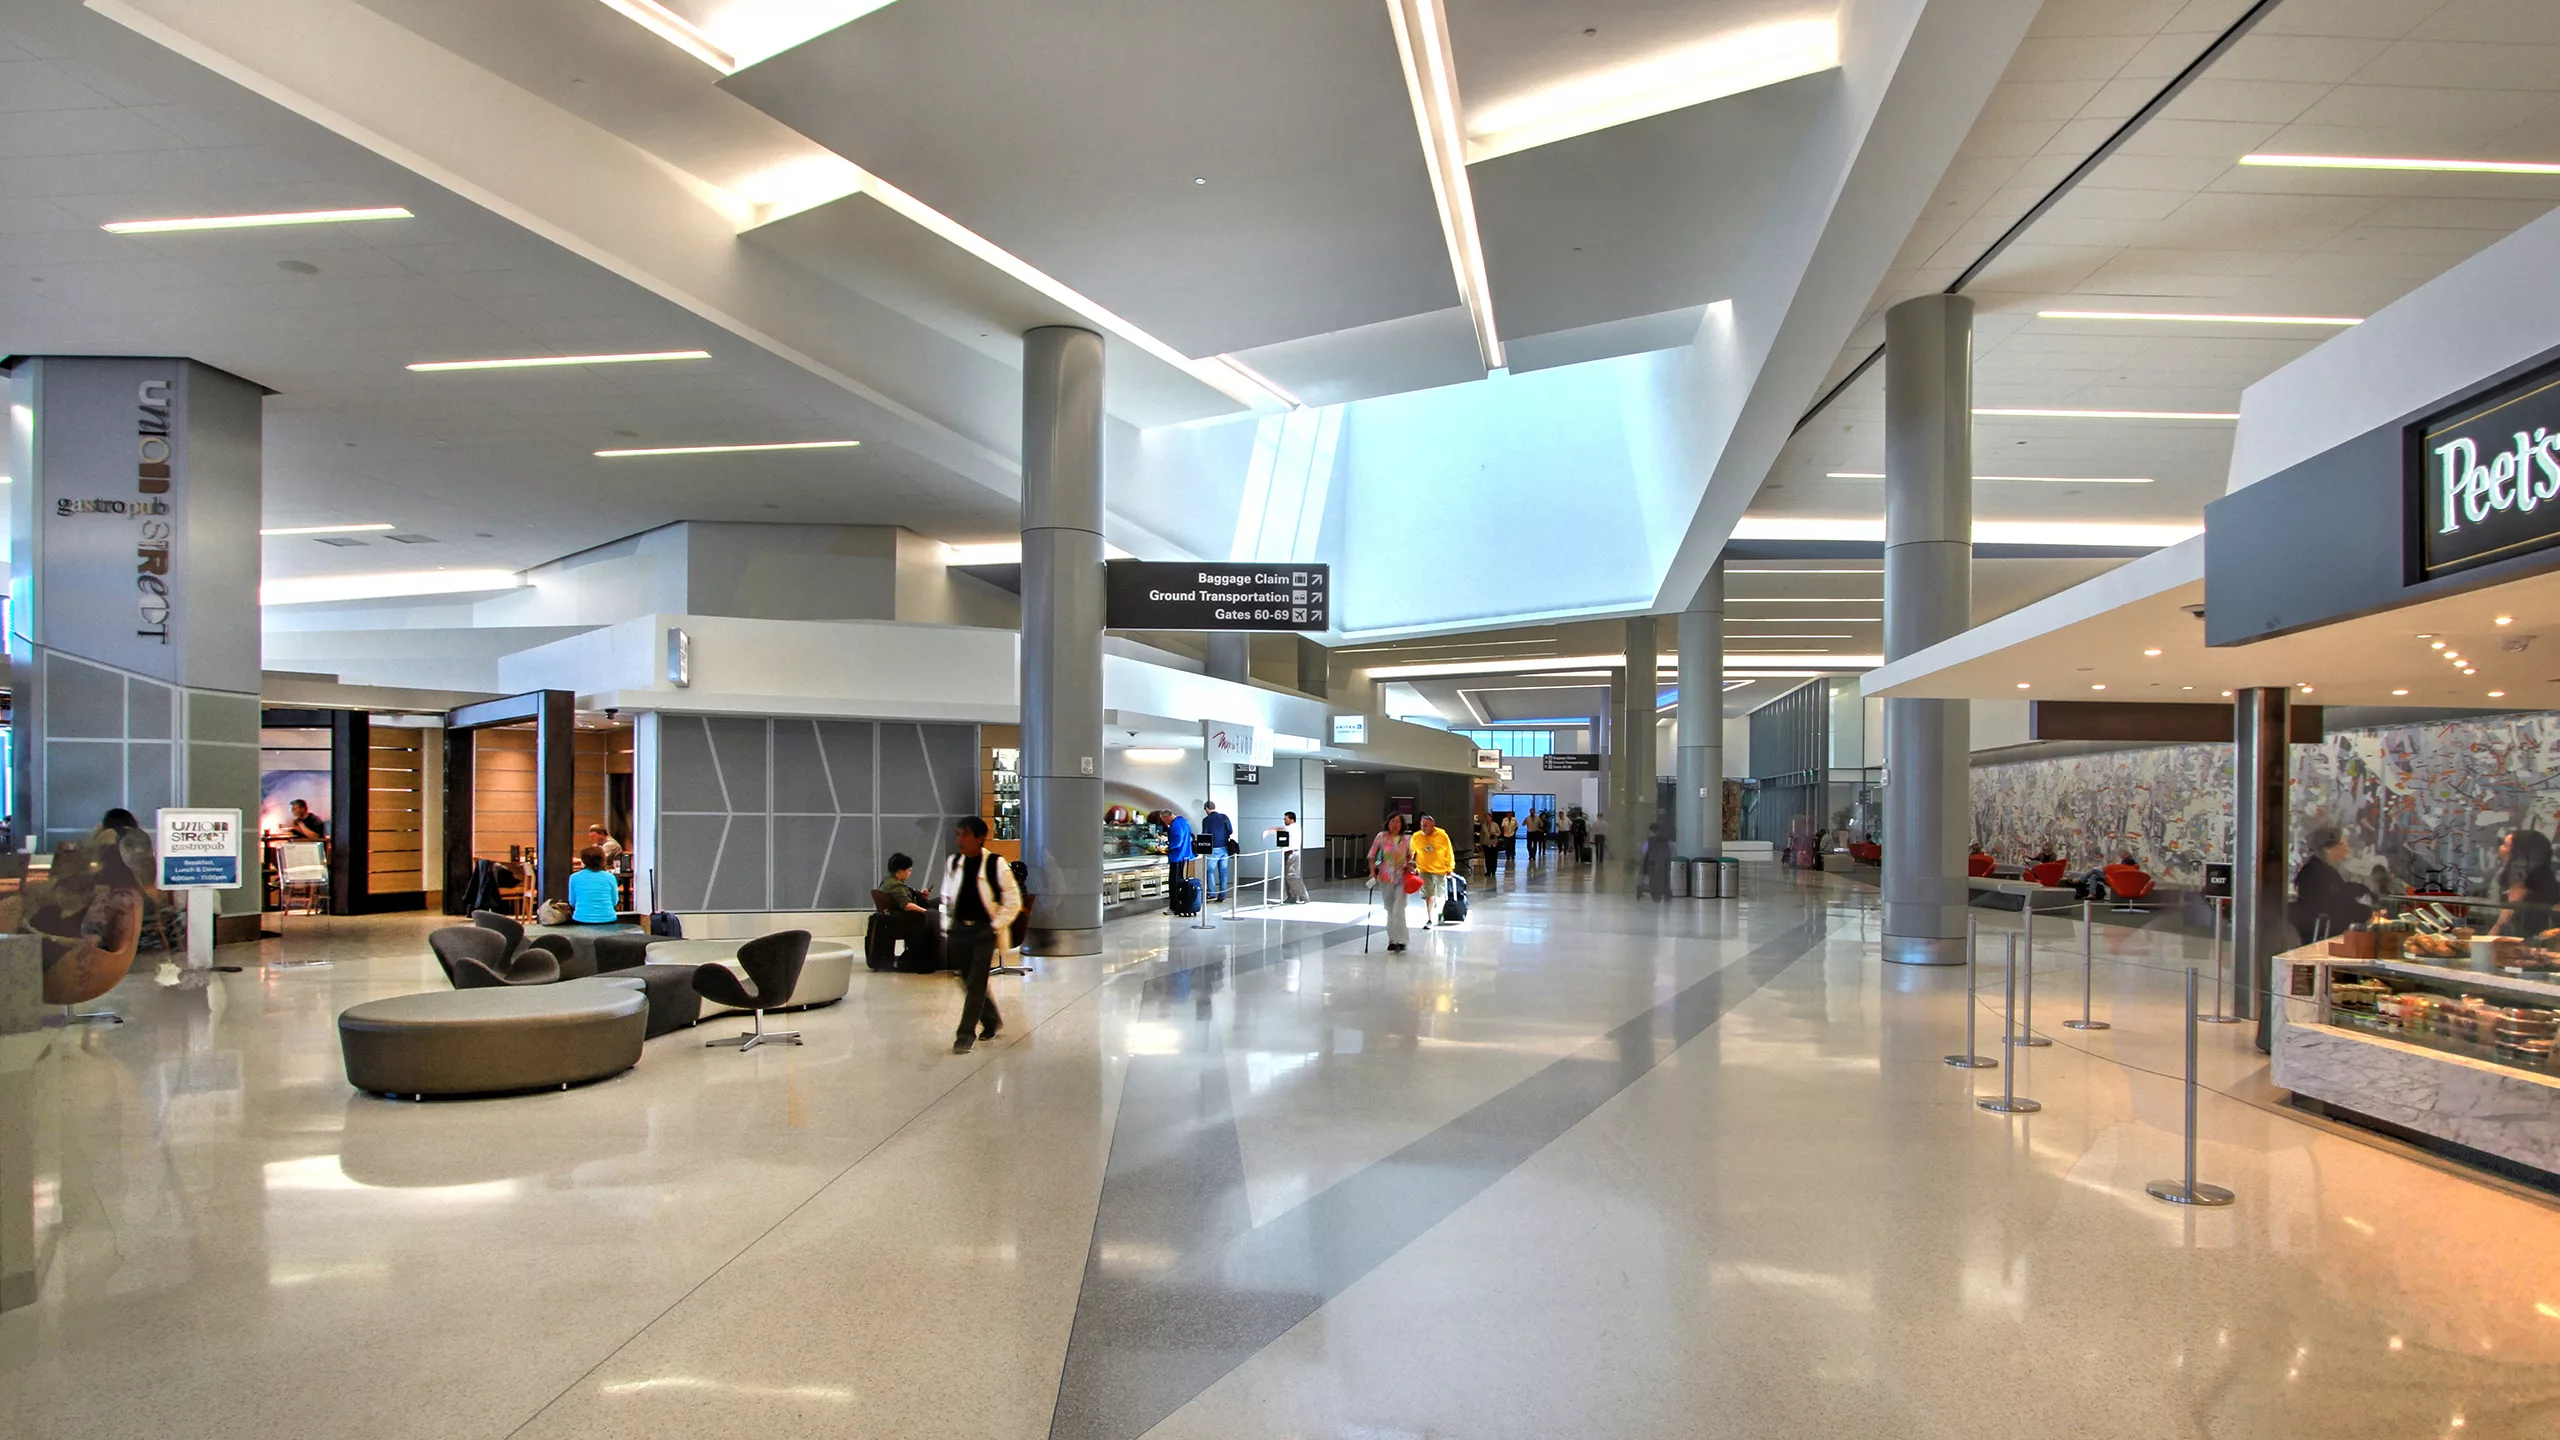 Interior view of San Francisco International Airport's Terminal 3 East Retrofit and Expansion with a coffee shop and travelers moving through the concourse